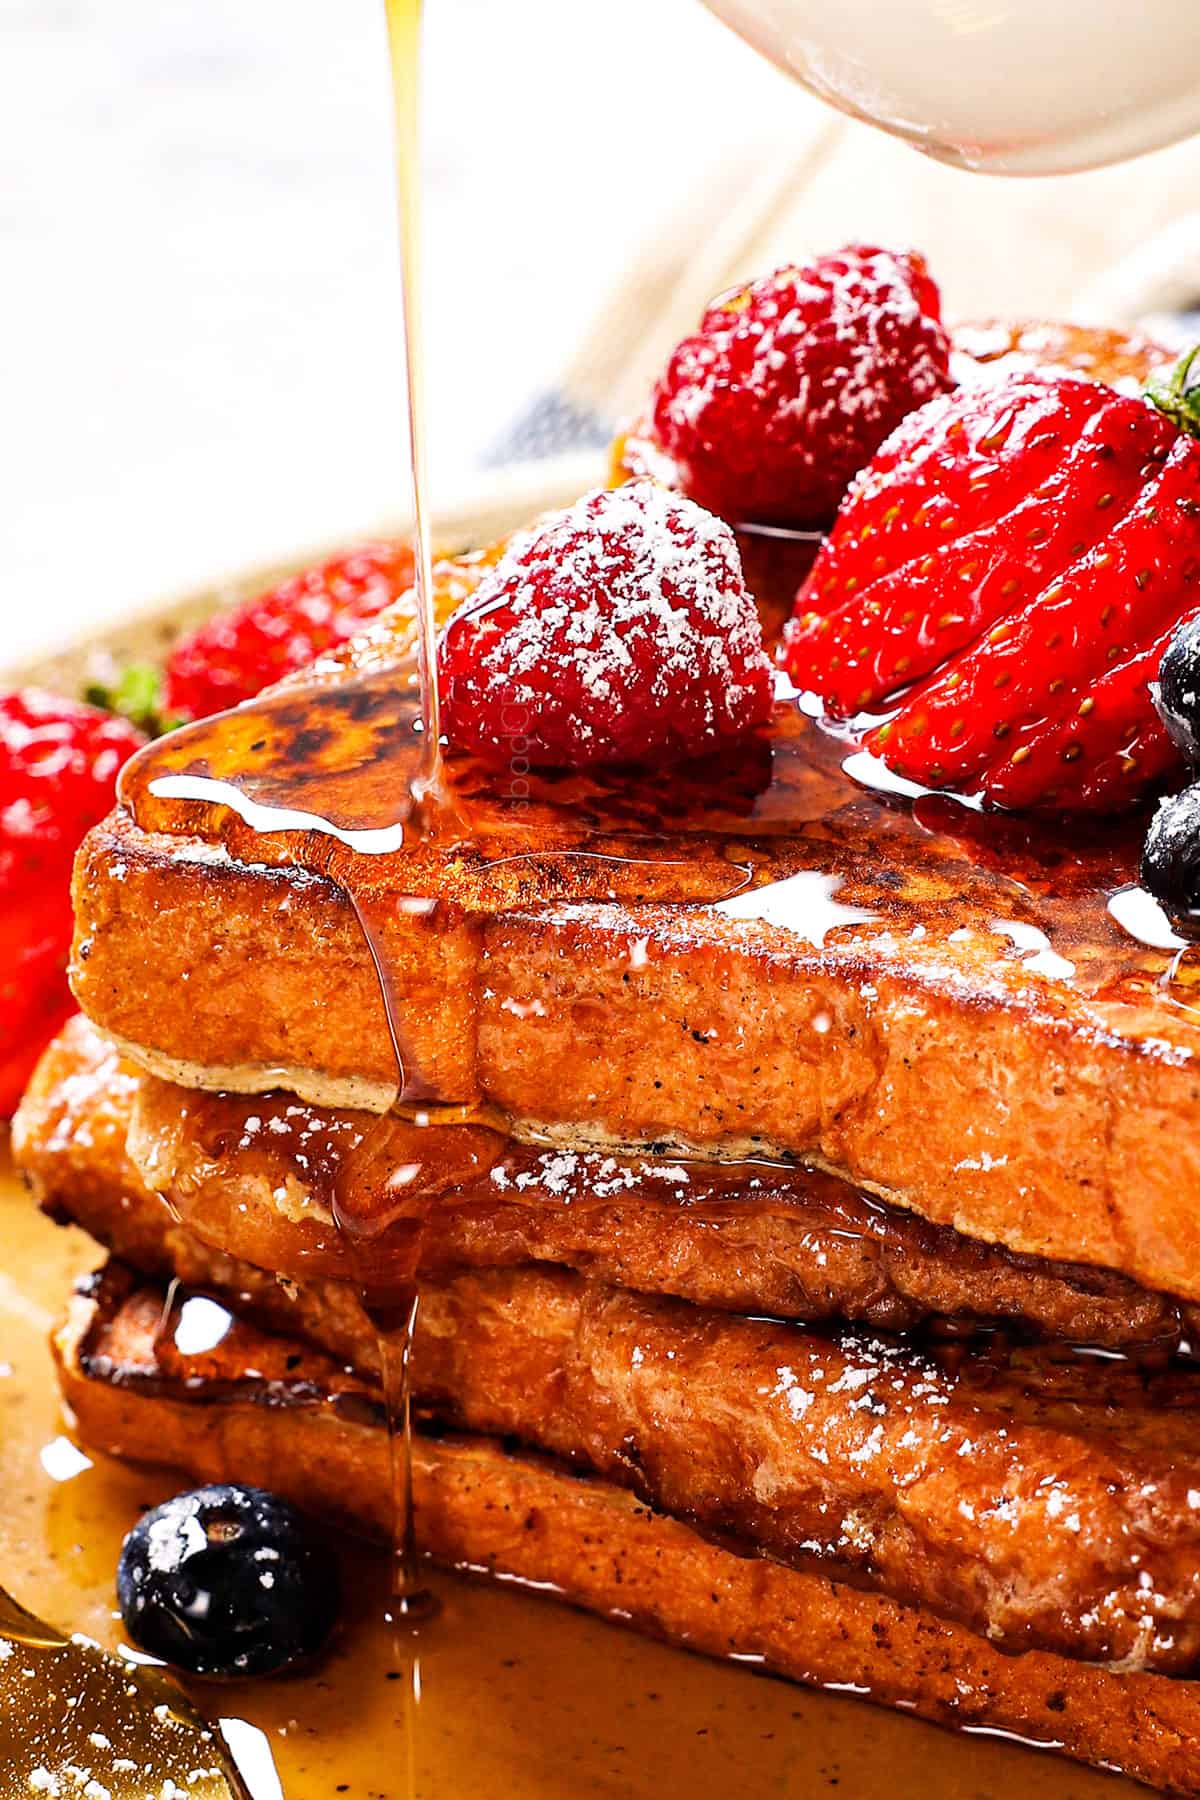 showing how to serve easy french toast by dusting with powdered sugar, topping with syrup and berries